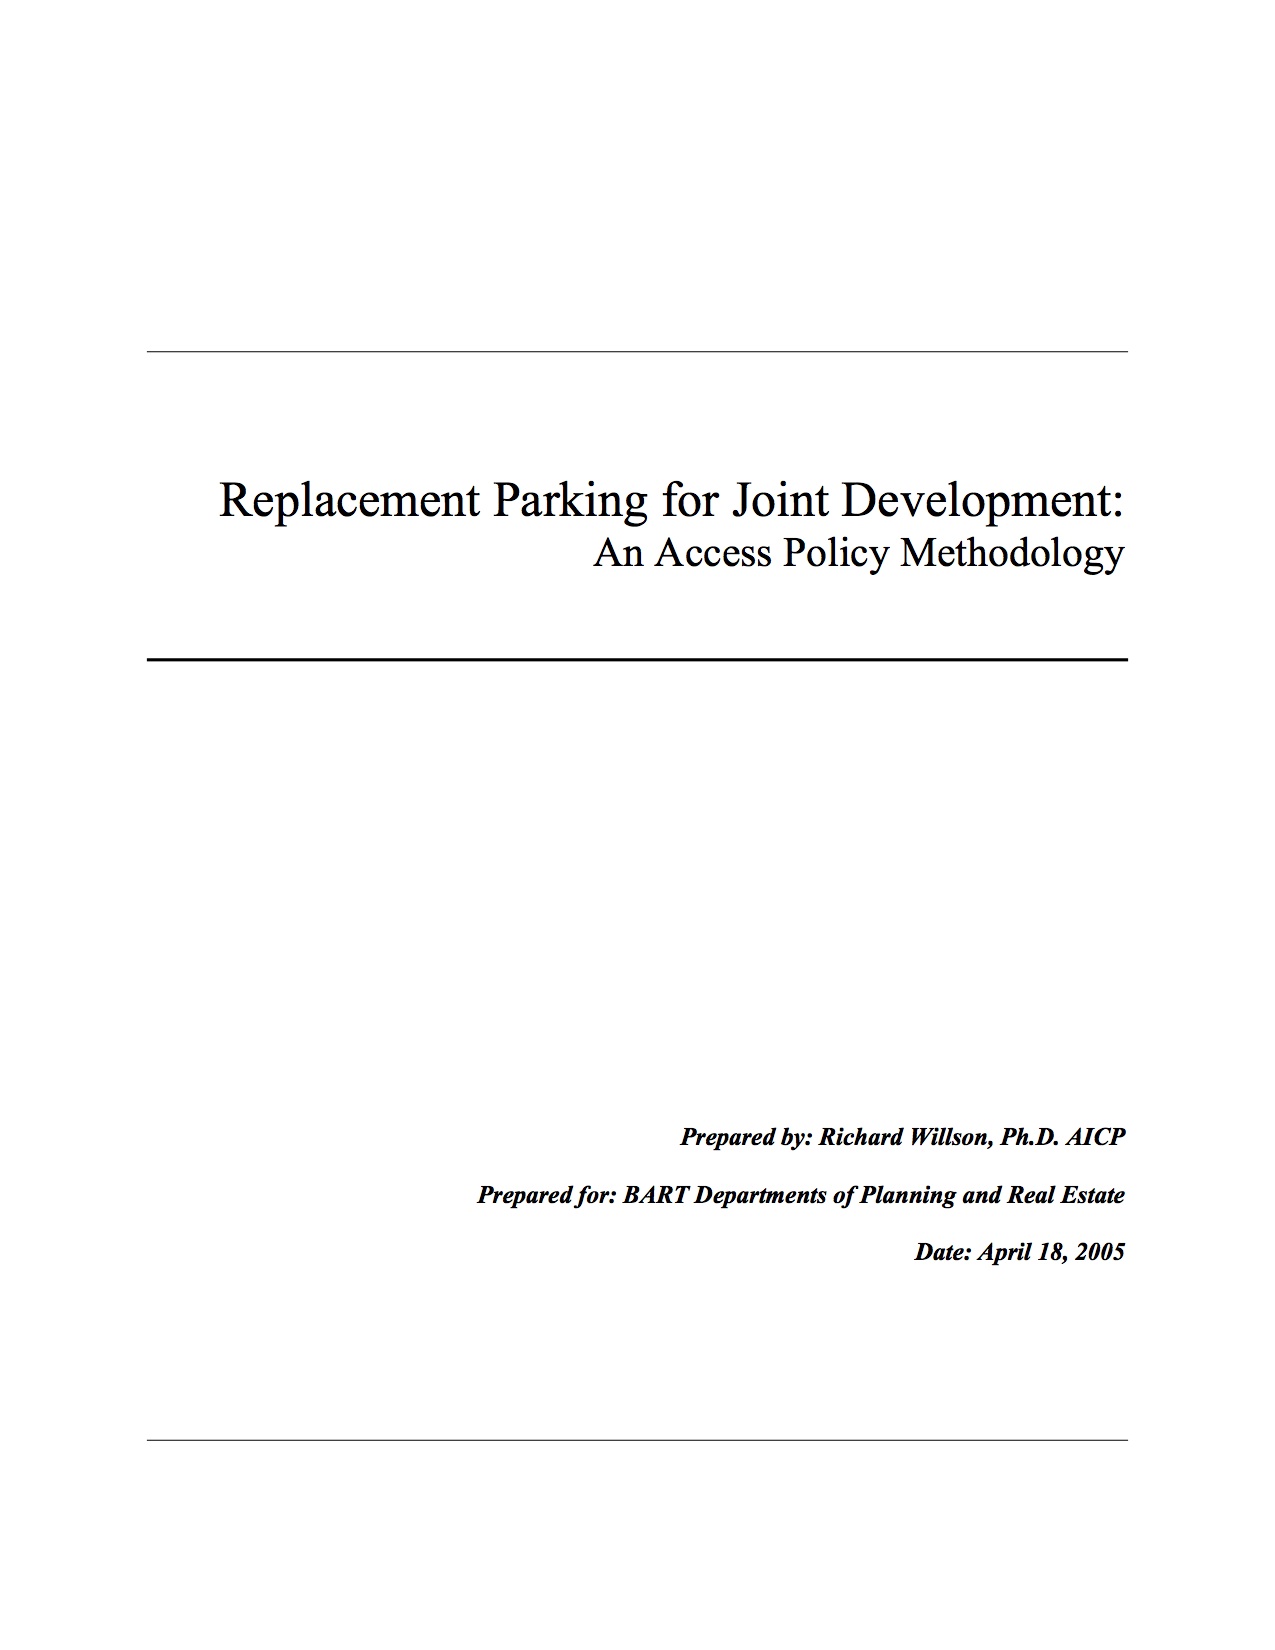 Replacement Parking for Joint Development: An Access Policy Methodology